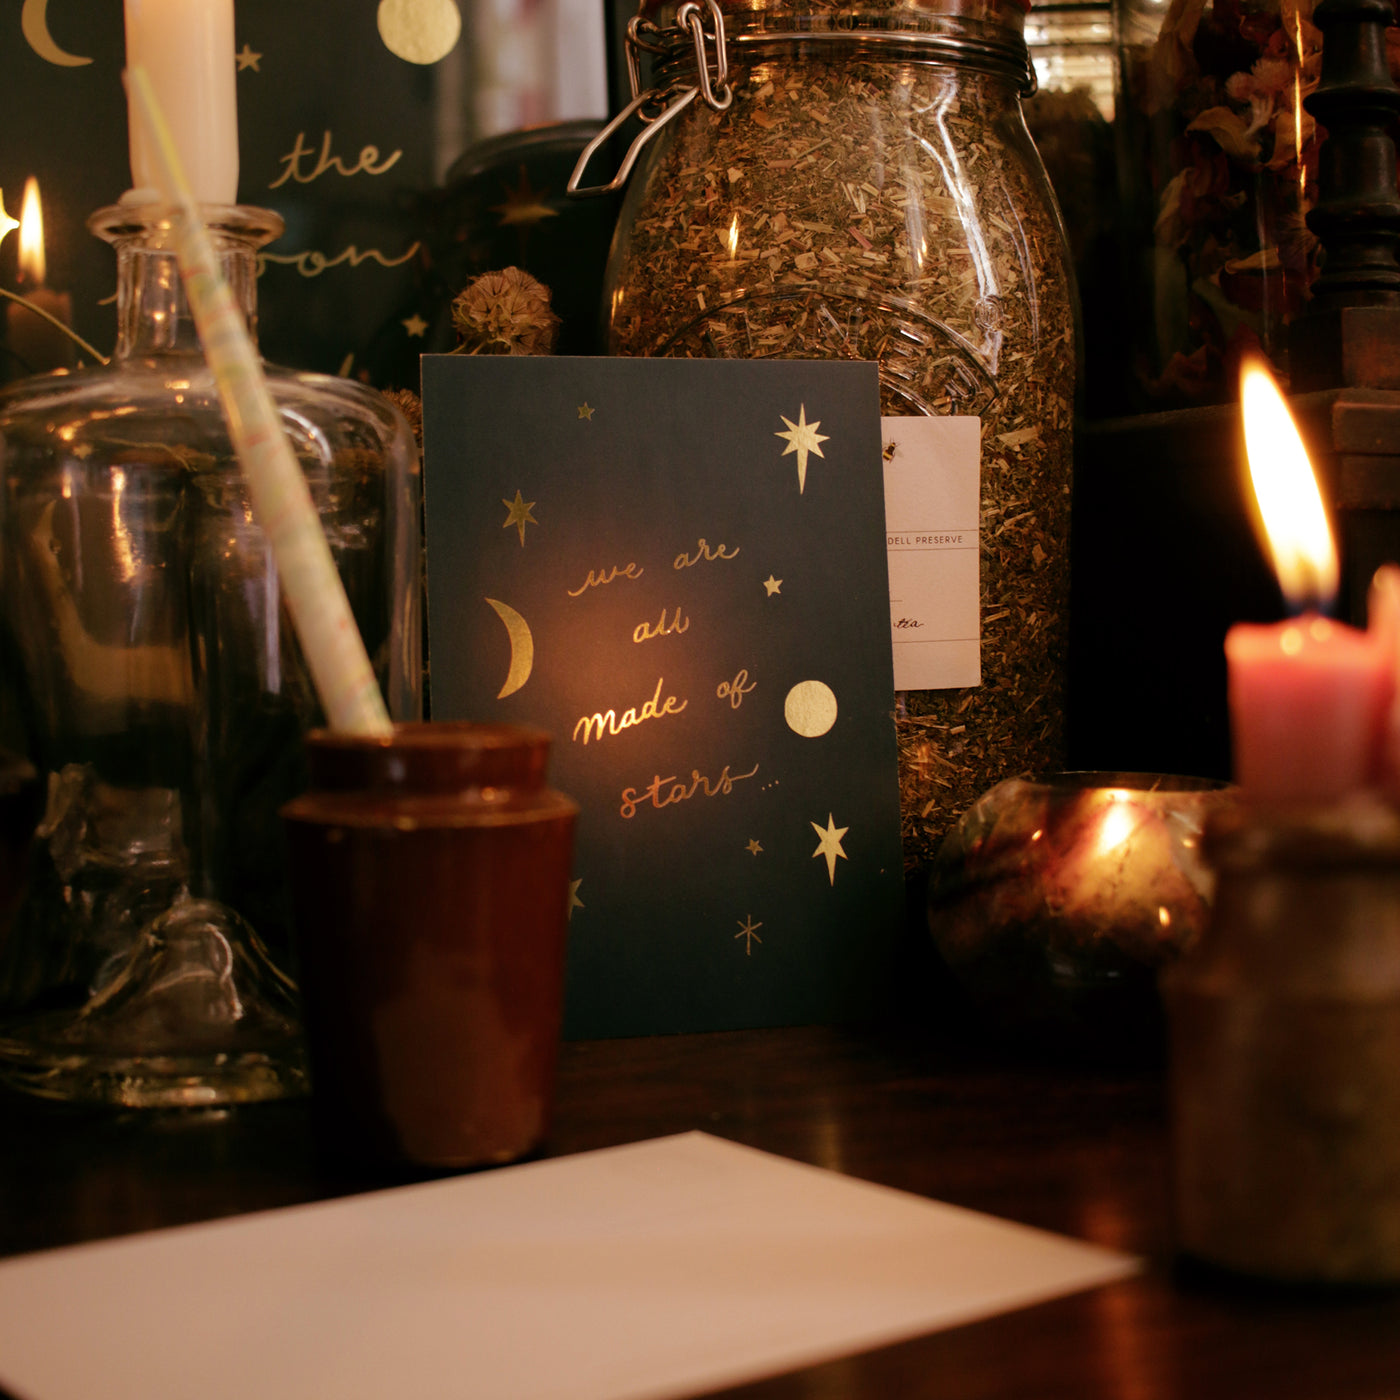 astrology postcard surrounded by apothecary bottles